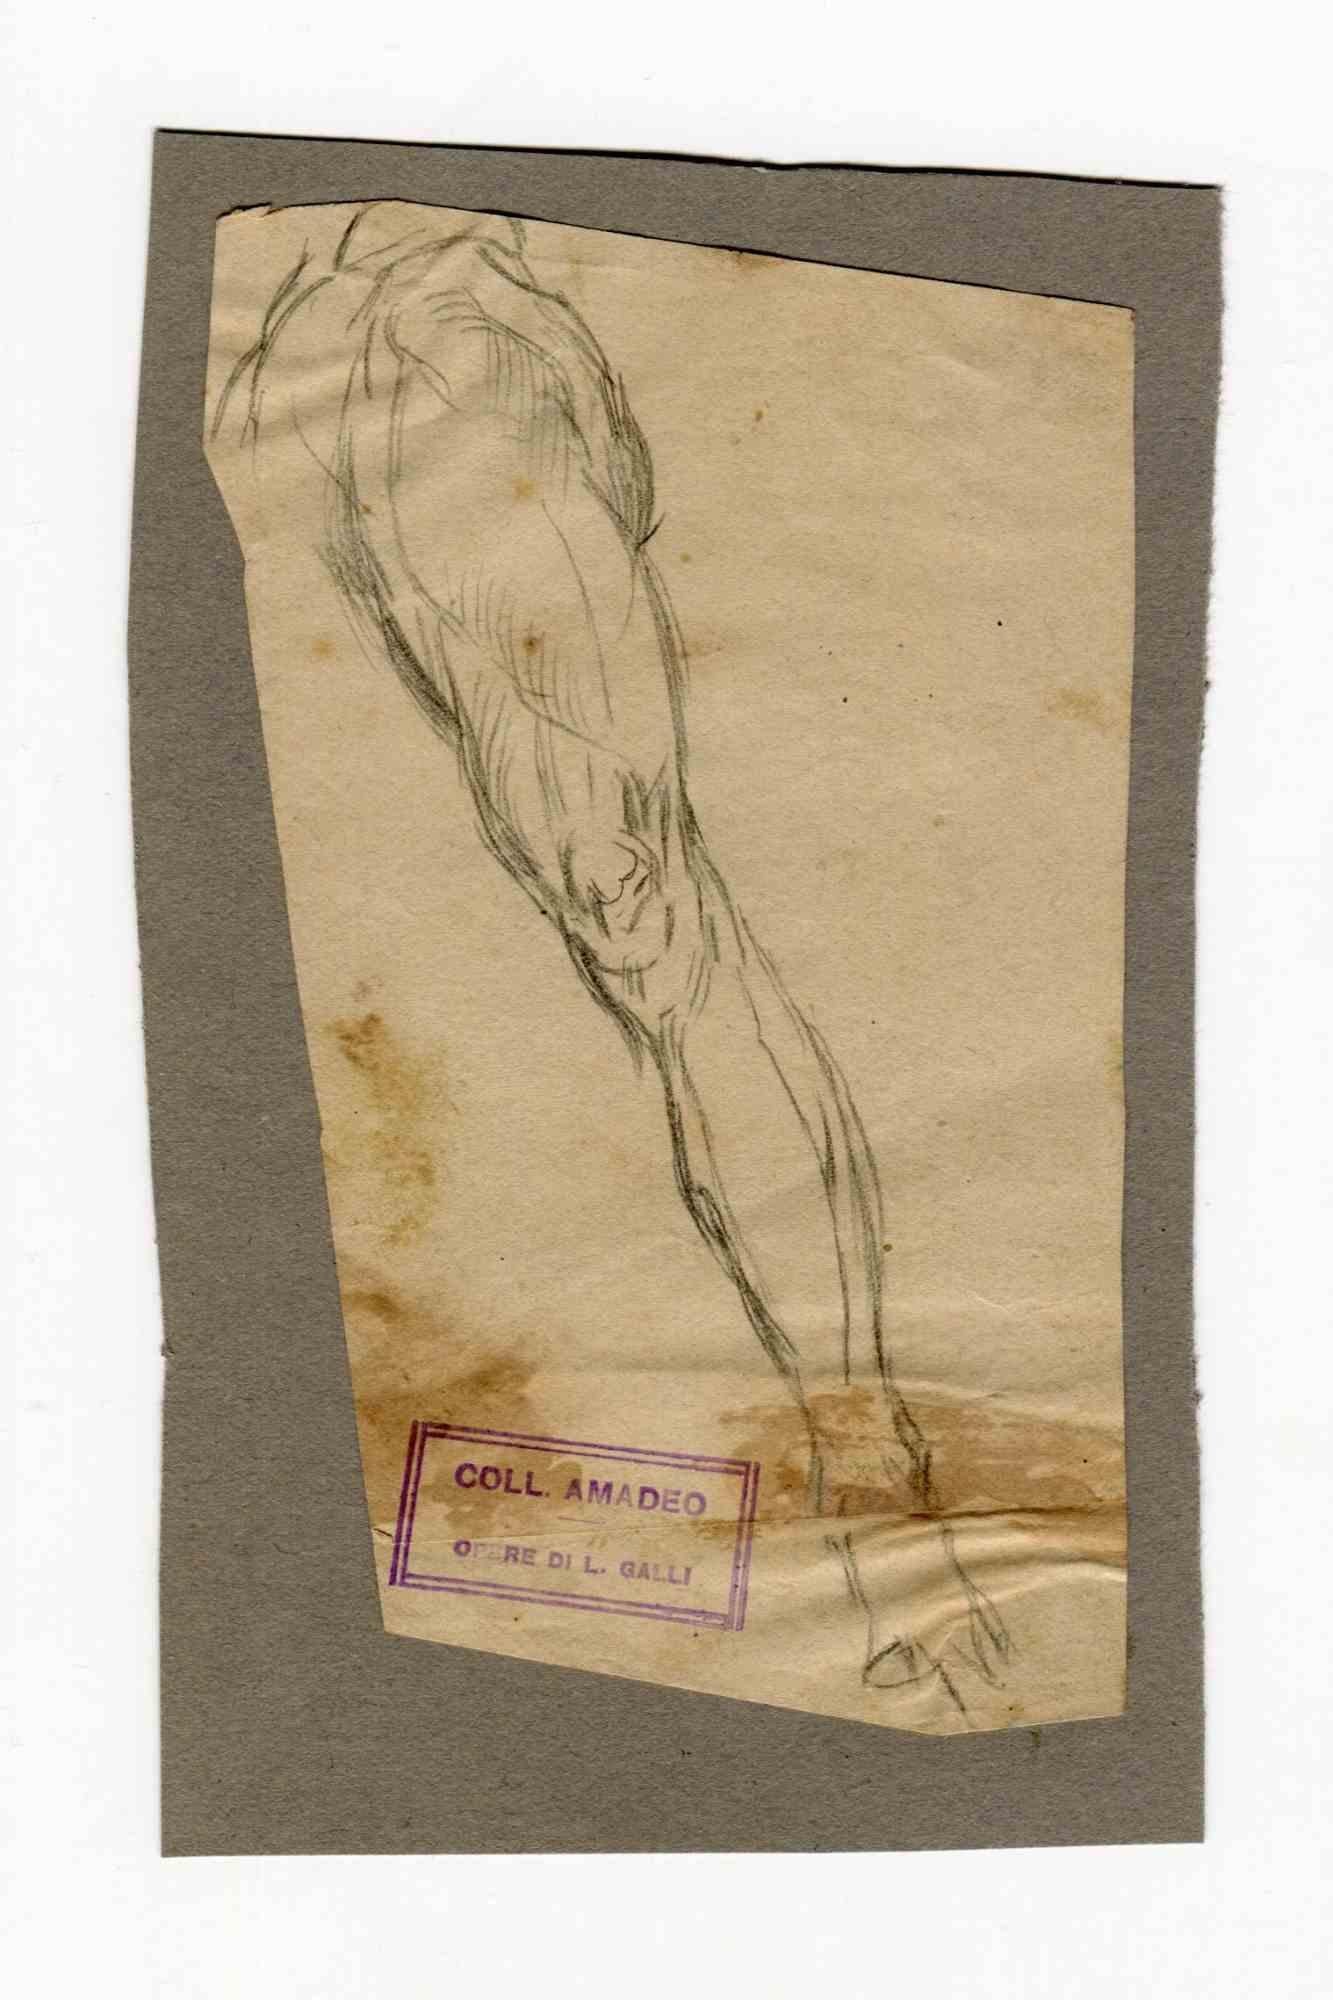 Leg is an original drawing realized by Luigi Galli in the Late 19th Century.

Stamped, "Coll. Amadeo"

Good conditions but aged.

The artwork is depicted through soft strokes and perfect hatchings.